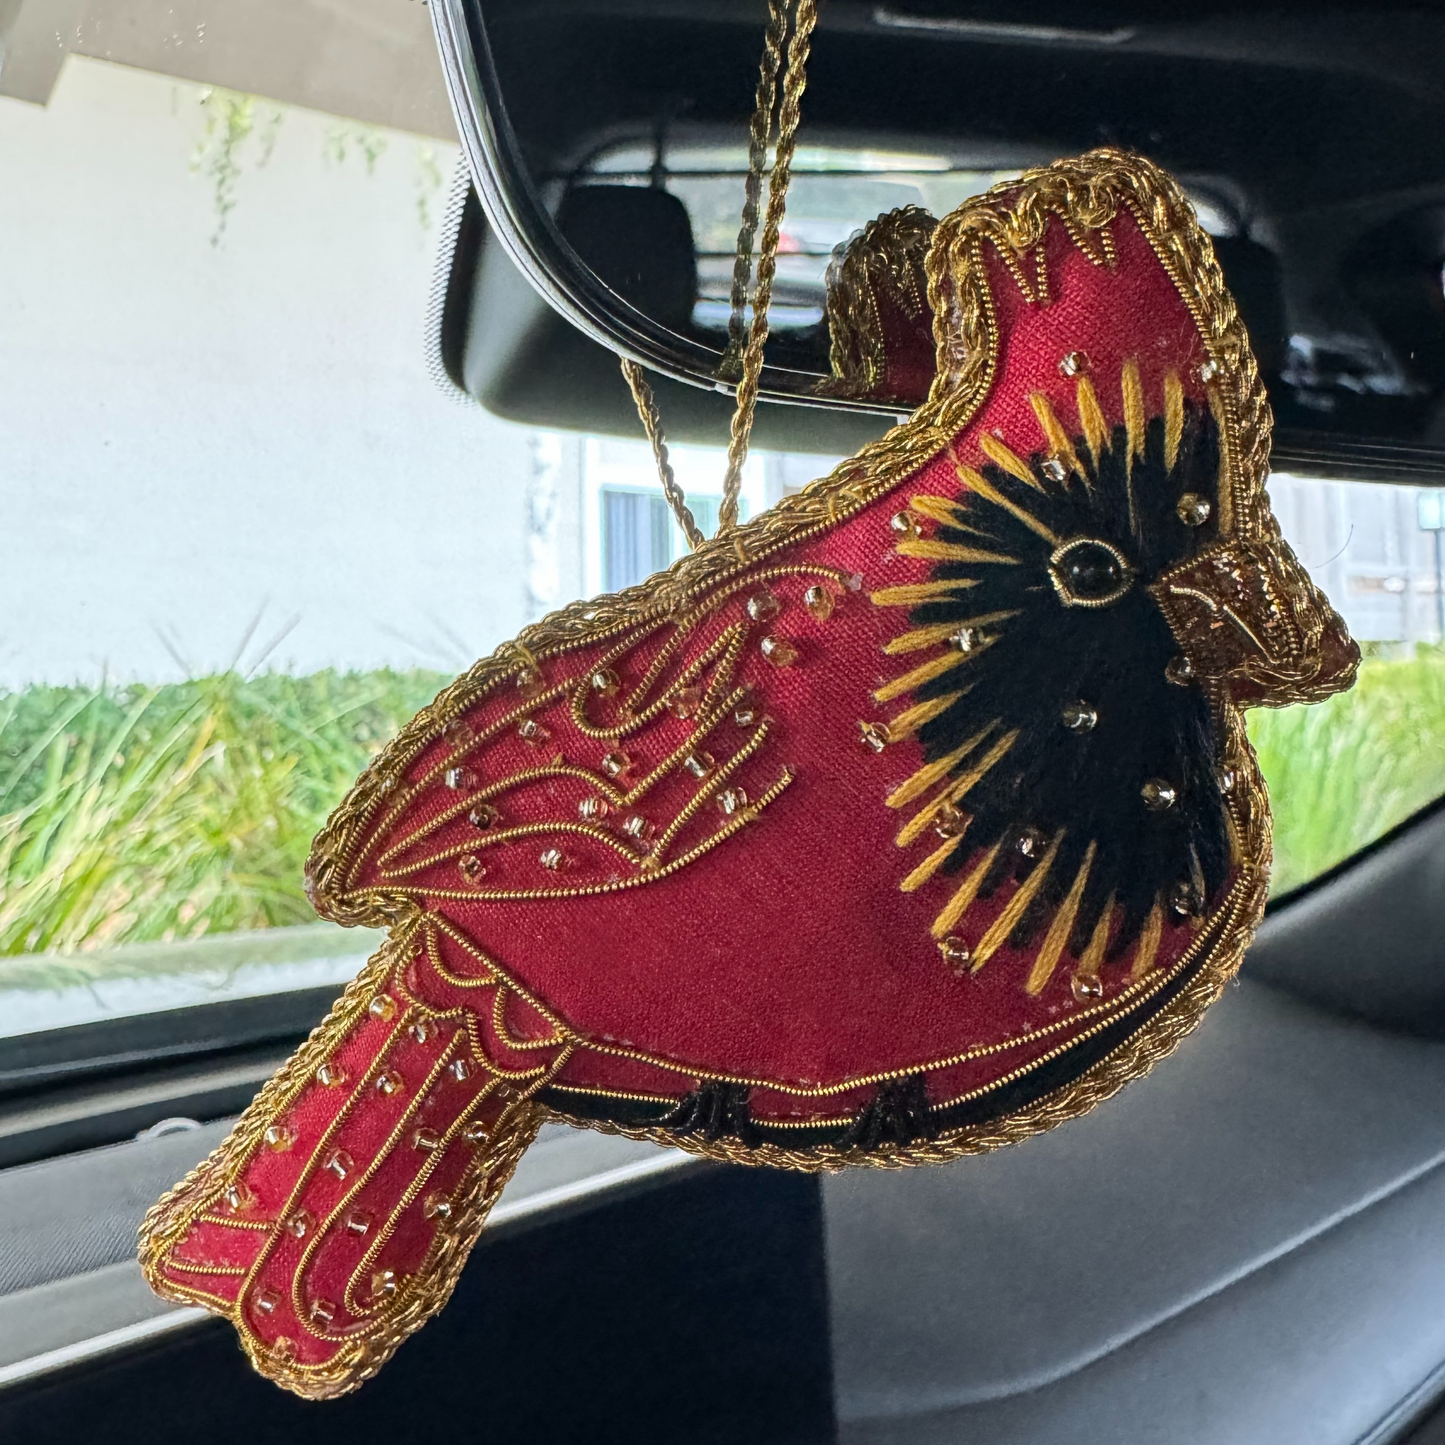 Red Cardinal with Zari Embroidery as a car ornament 